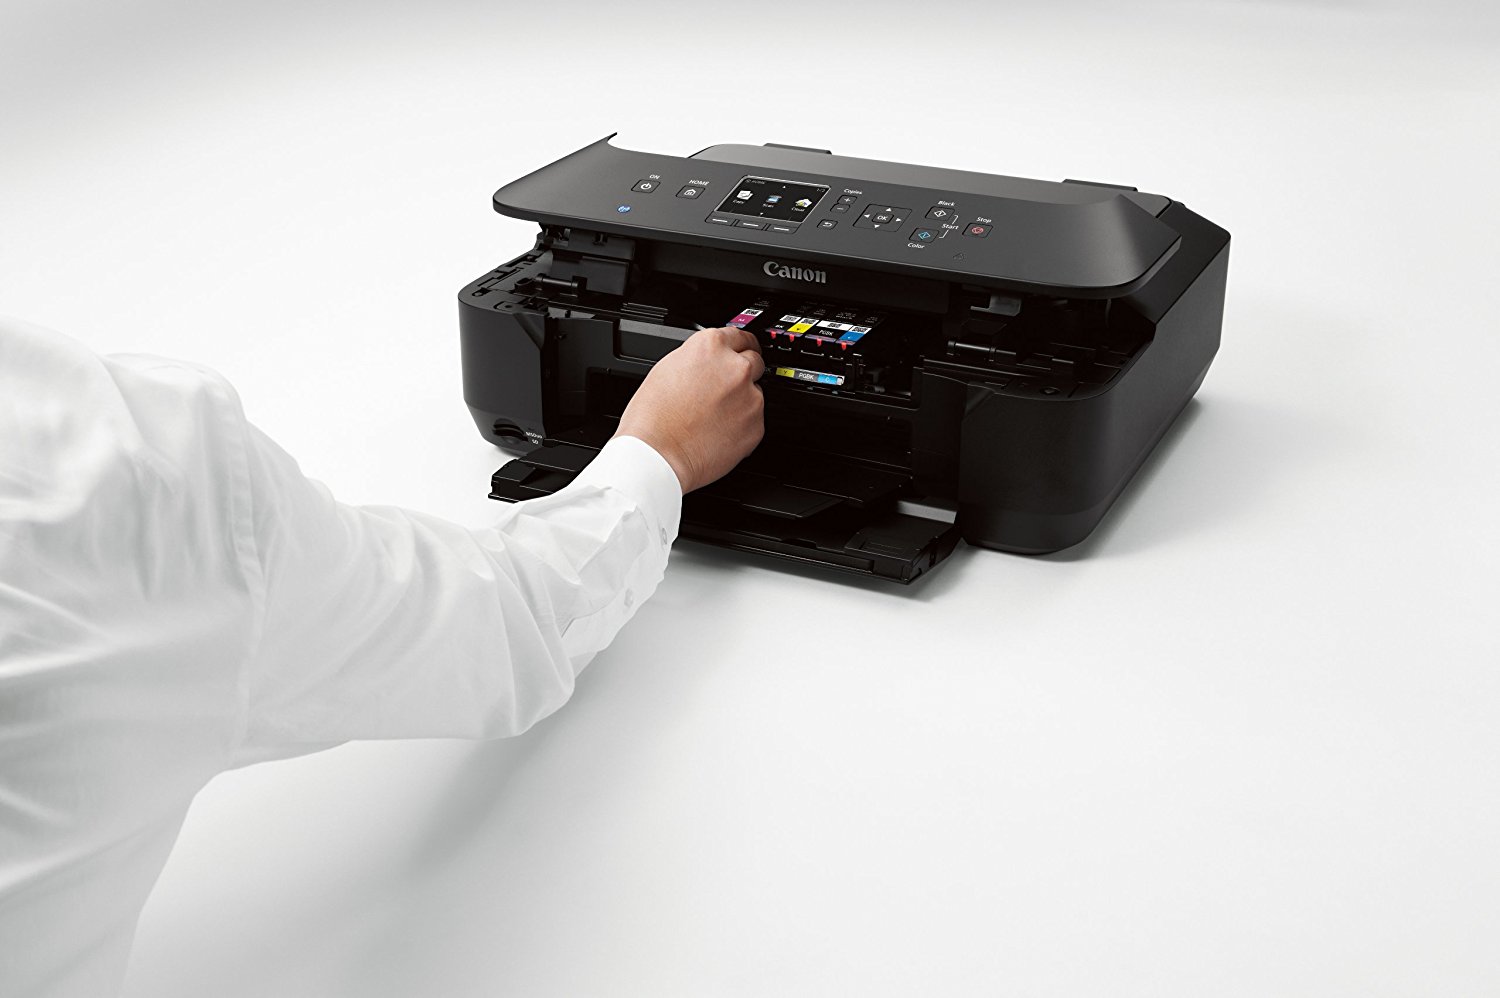 Canon Pixma Mg6420 Wireless Inkjet All In One Printer Discontinued By Manufacturer N13 Free 0374